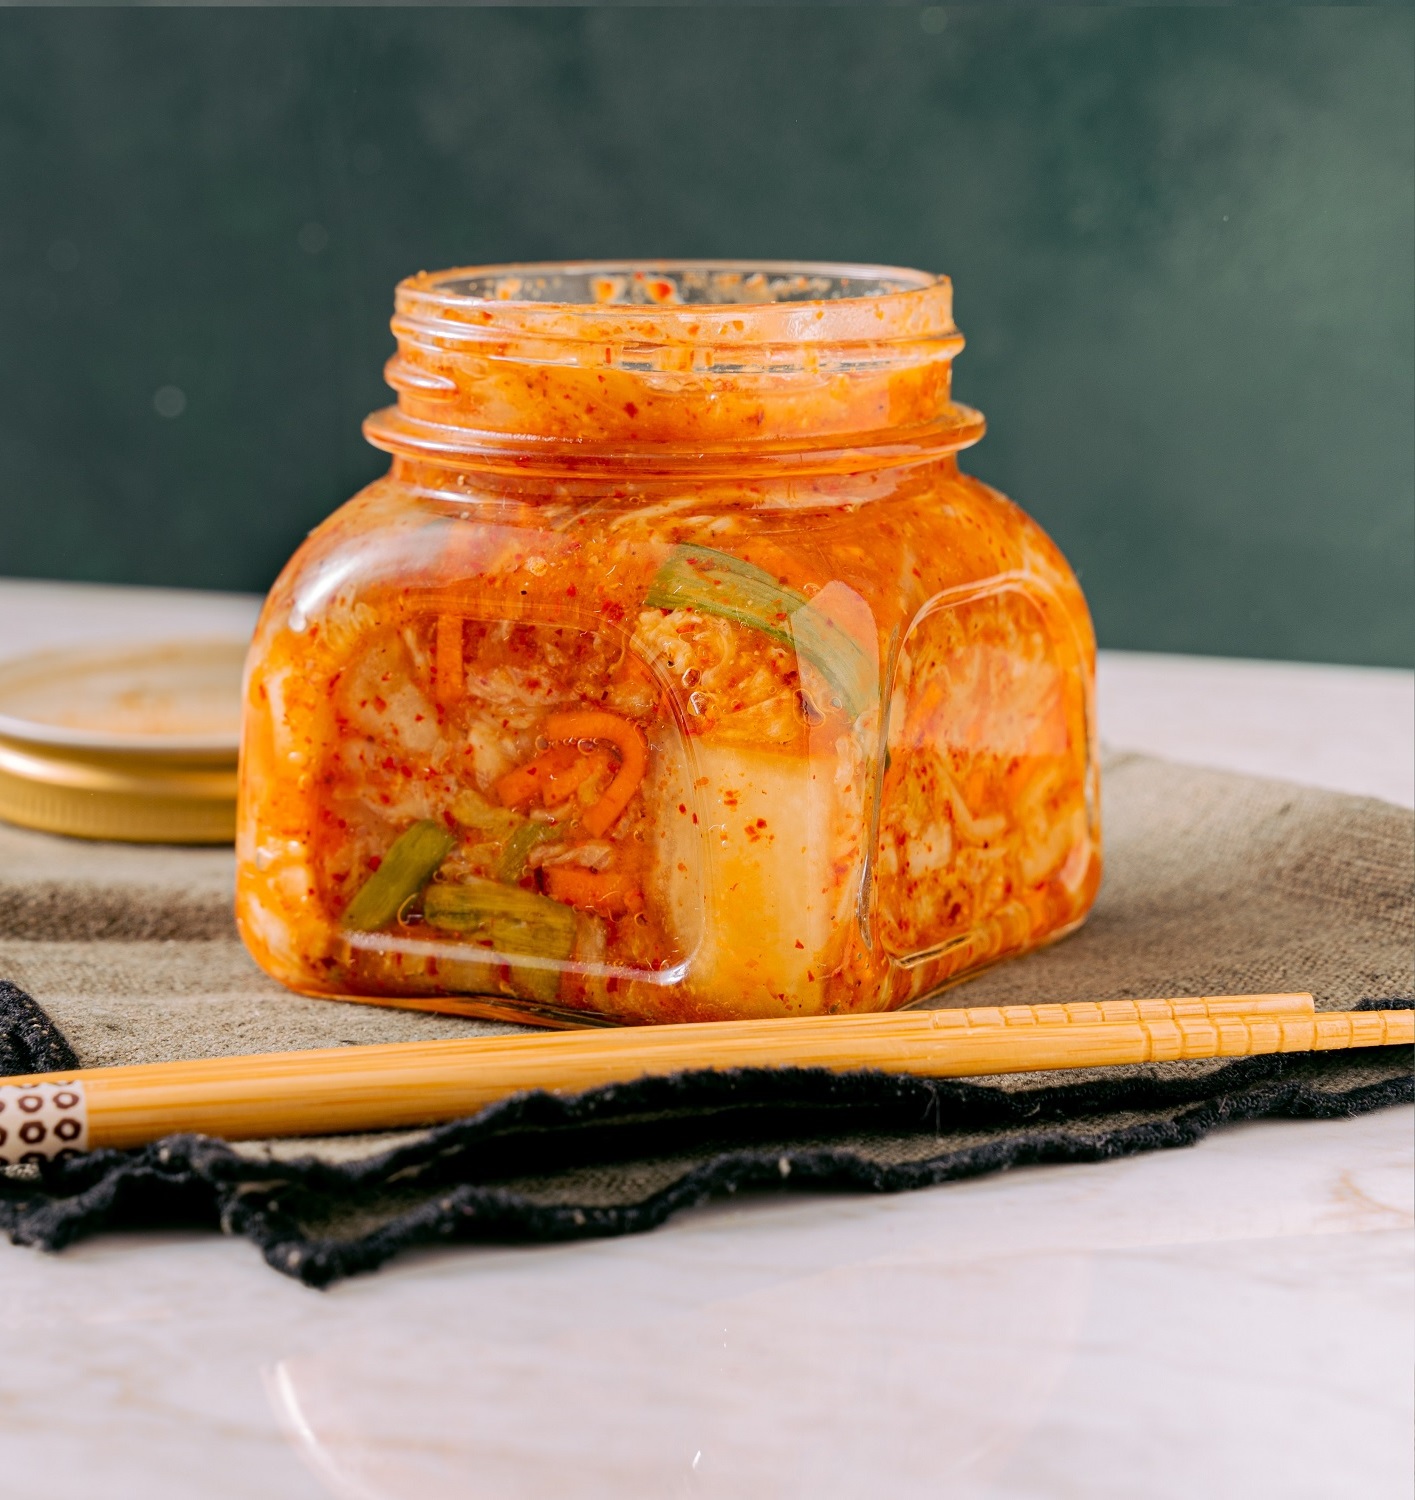 Benefits of kimchi for gut health